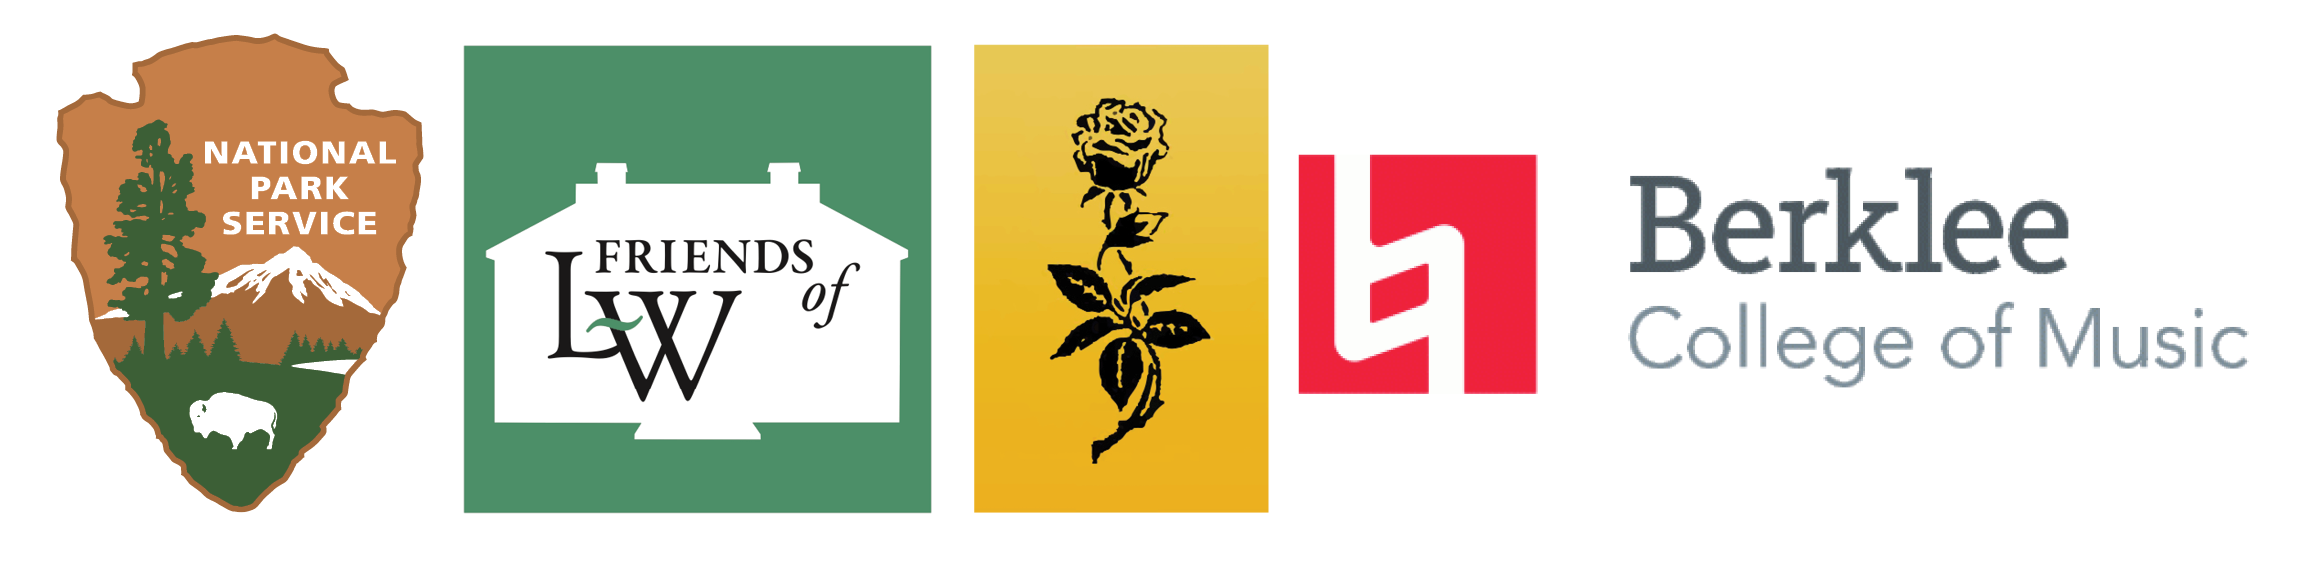 National Park Service, Friends of the Longfellow House, New England Poetry Club, and Berklee College of Music logos